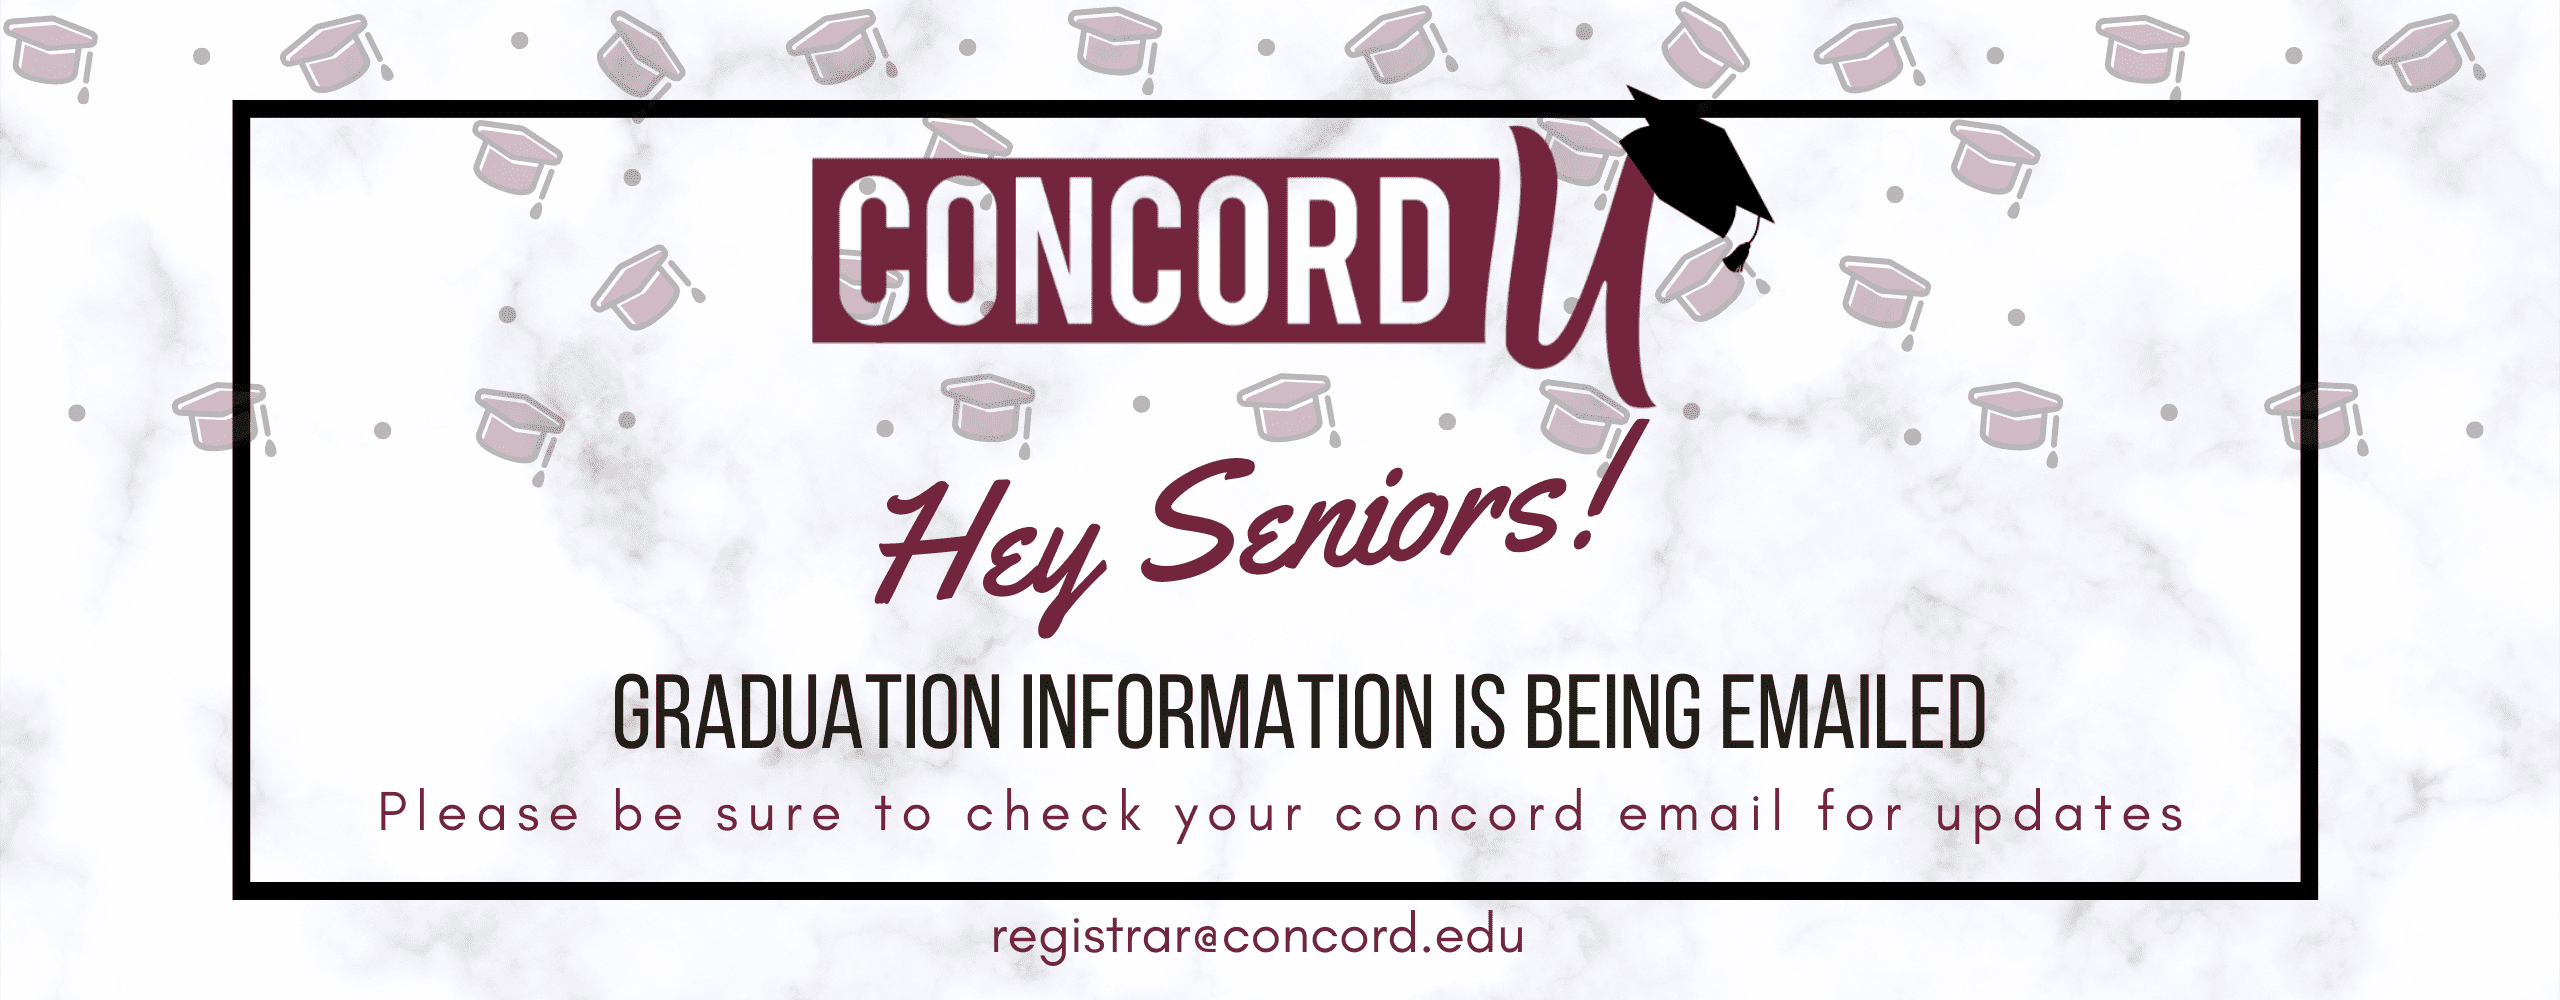 Hey seniors! Graduation information is being emailed. Please be sure to check your Concord email for updates.